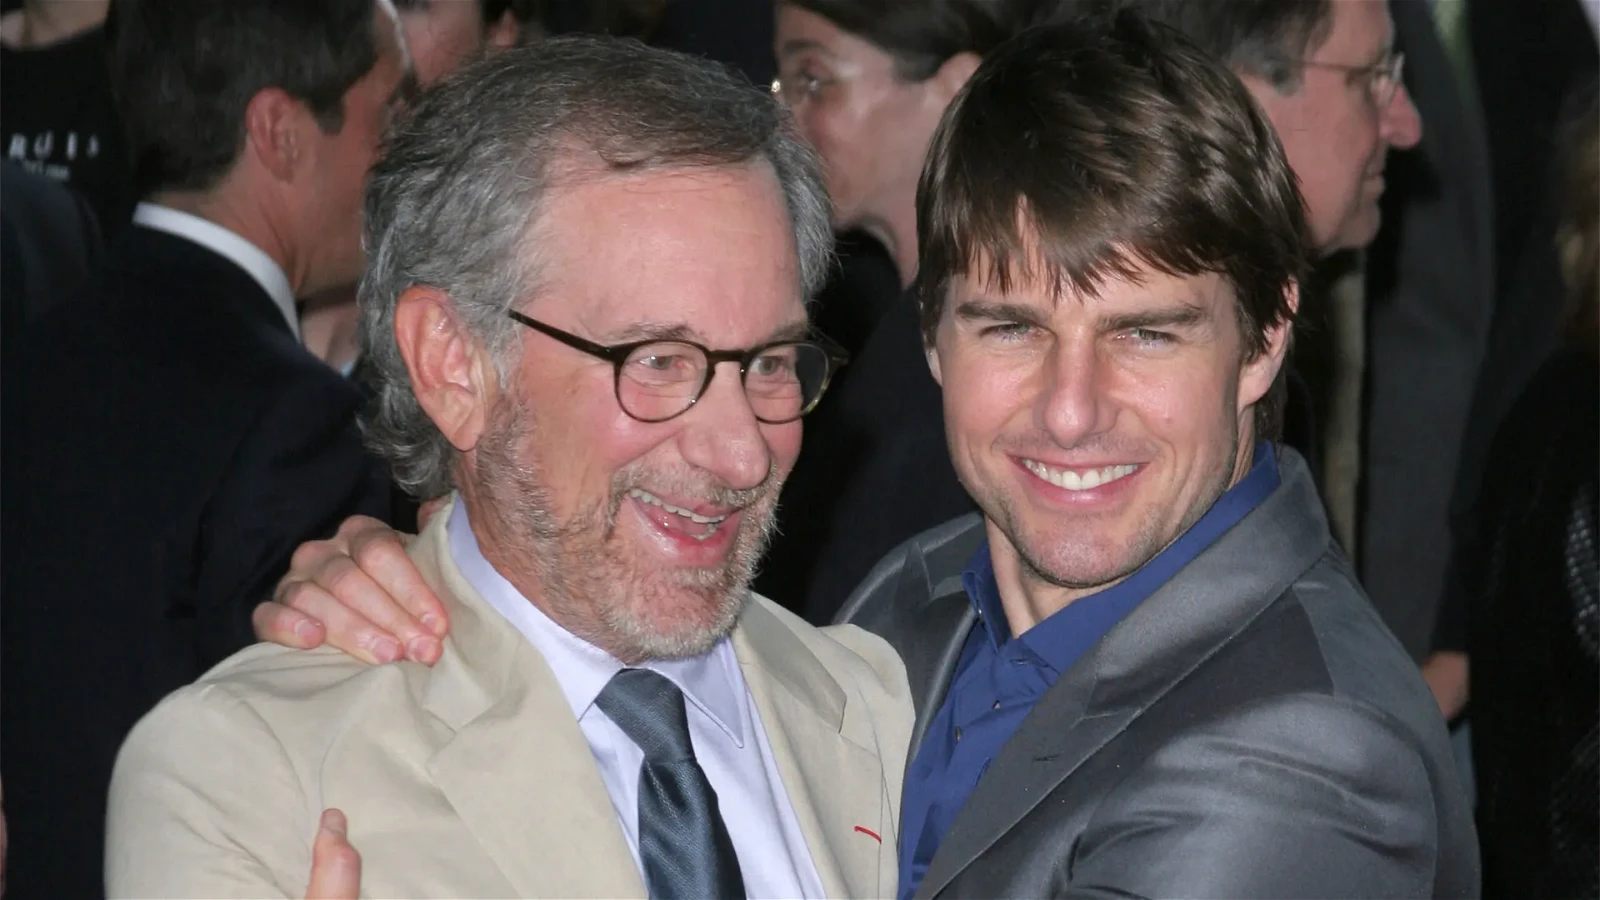 Steven Spielberg and Tom Cruise